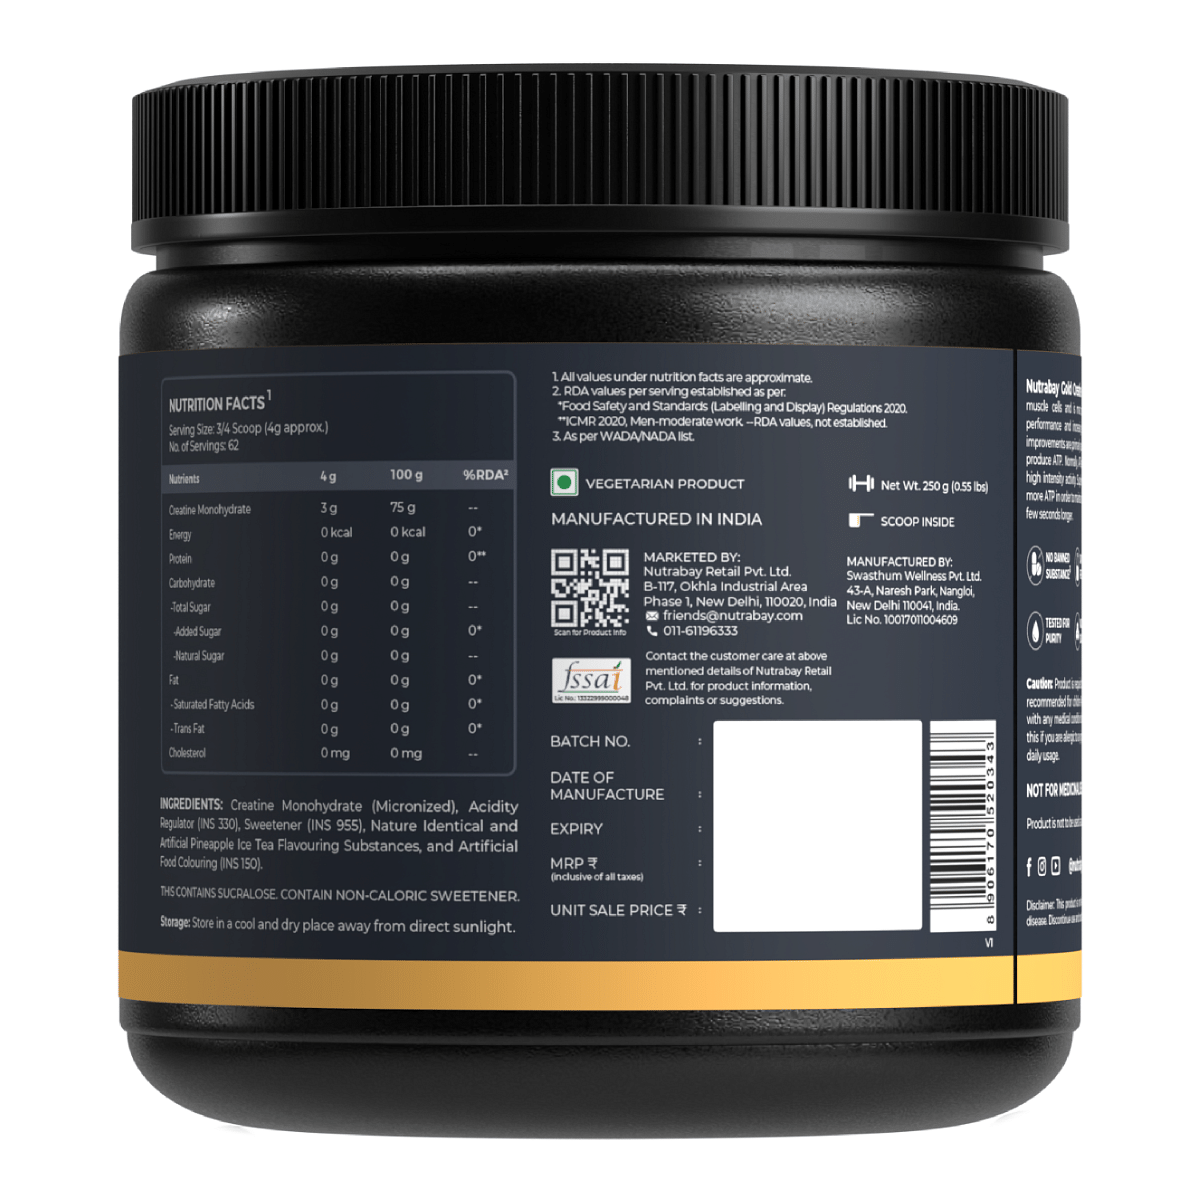 Nutrabay Gold Creatine Monohydrate 250g Pineapple Ice Tea Flavor Pre/Post Workout Supplement for Muscle Repair, Recovery, Performance, Power.